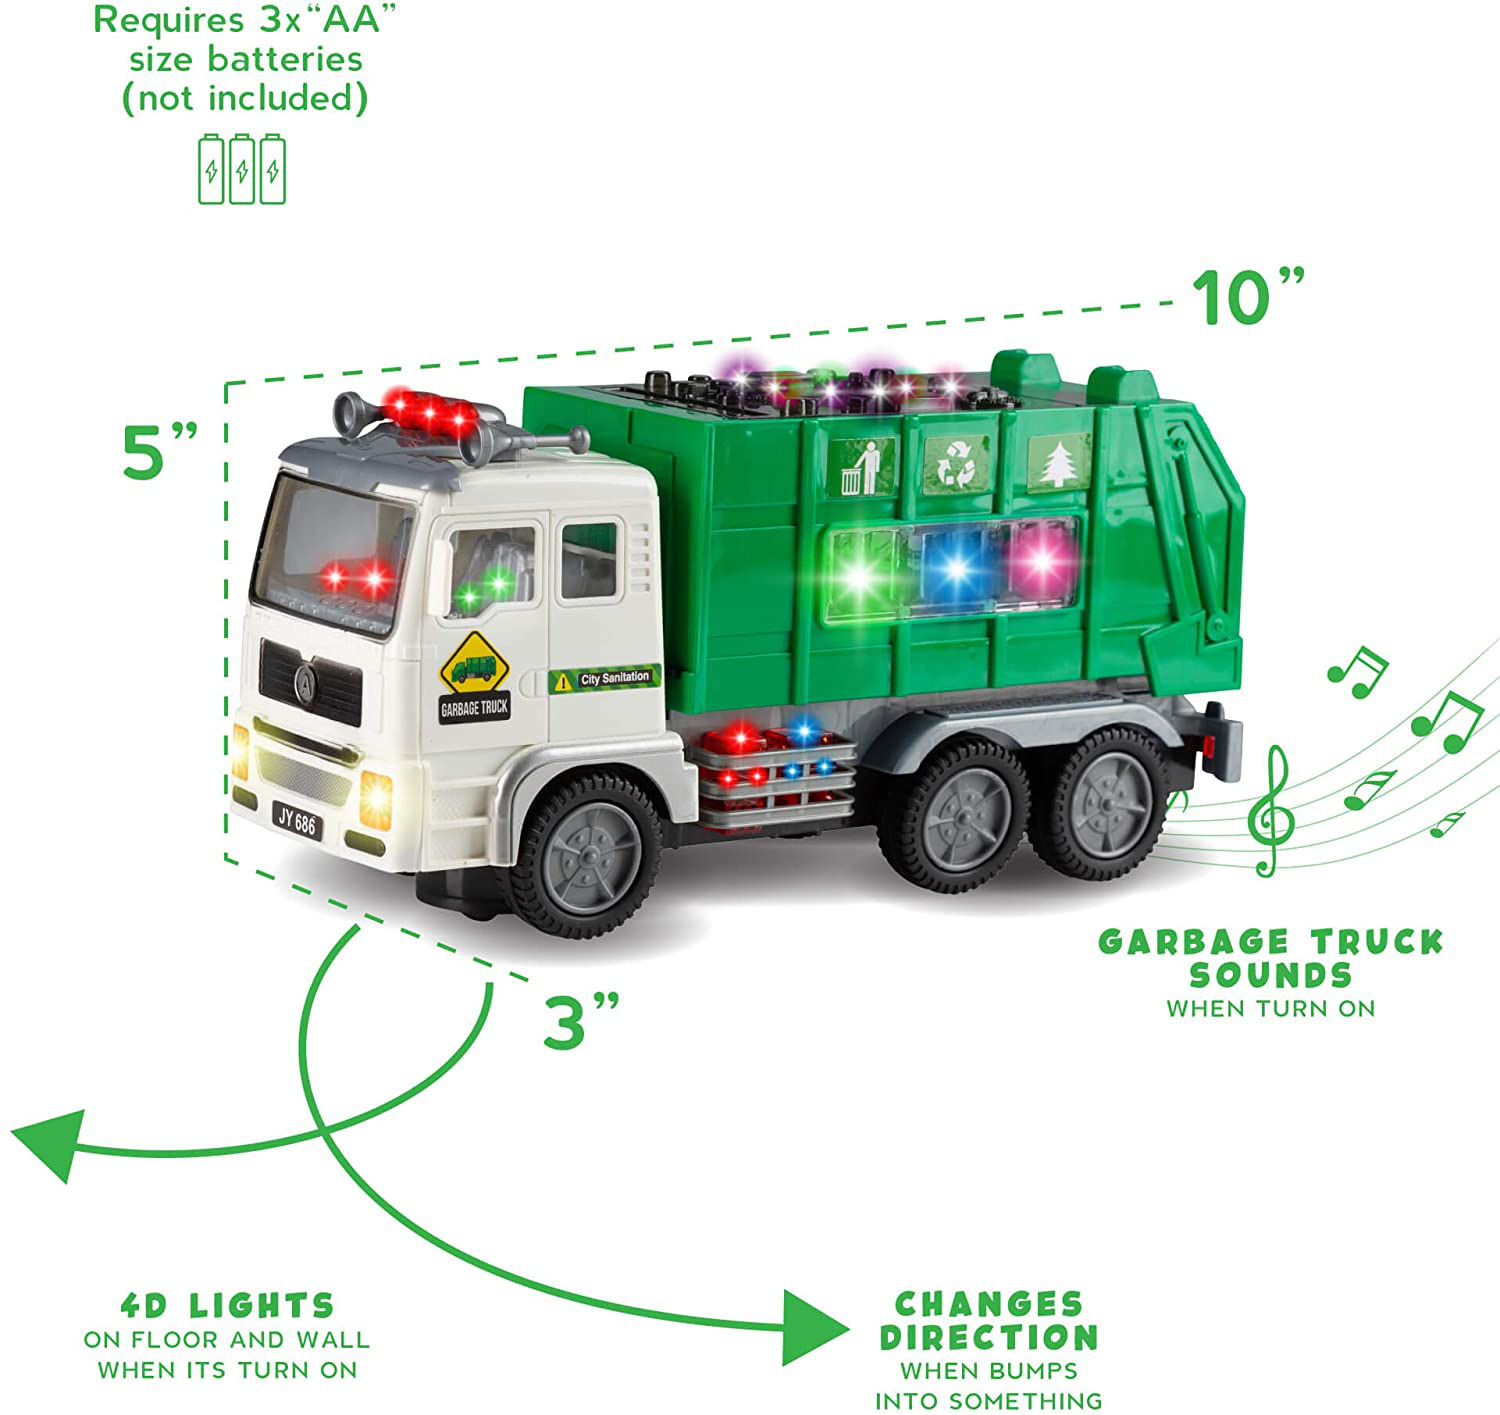 &nbsp; Toy Garbage Truck for Kids with 4D Lights and Sounds - Battery Operated